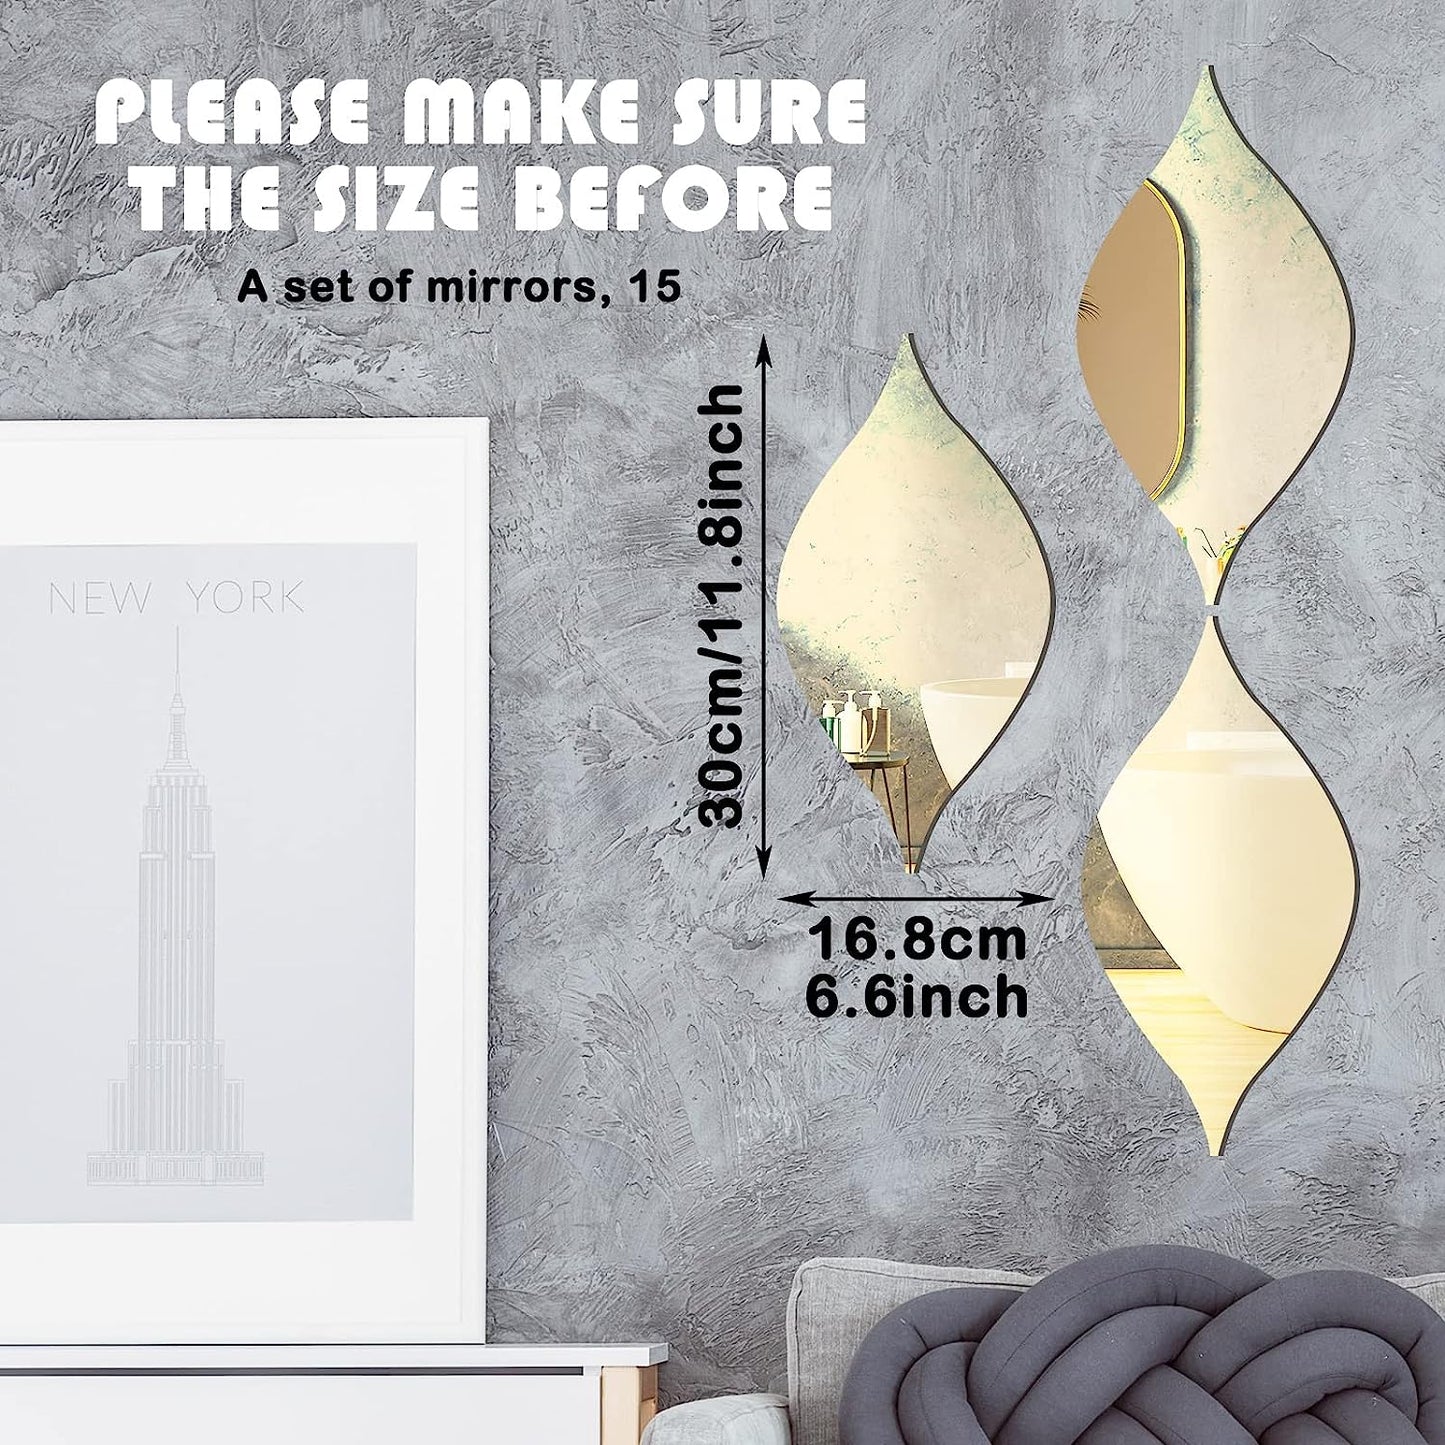 15 Pack Removable Acrylic Mirror Wall Stickers Teardrop Mirror Acrylic Wall Sticker 3D DIY Wall Decals Art for Living Room Bathroom Home Office Classroom, 11.8 x 6.6 Inch (Gold)